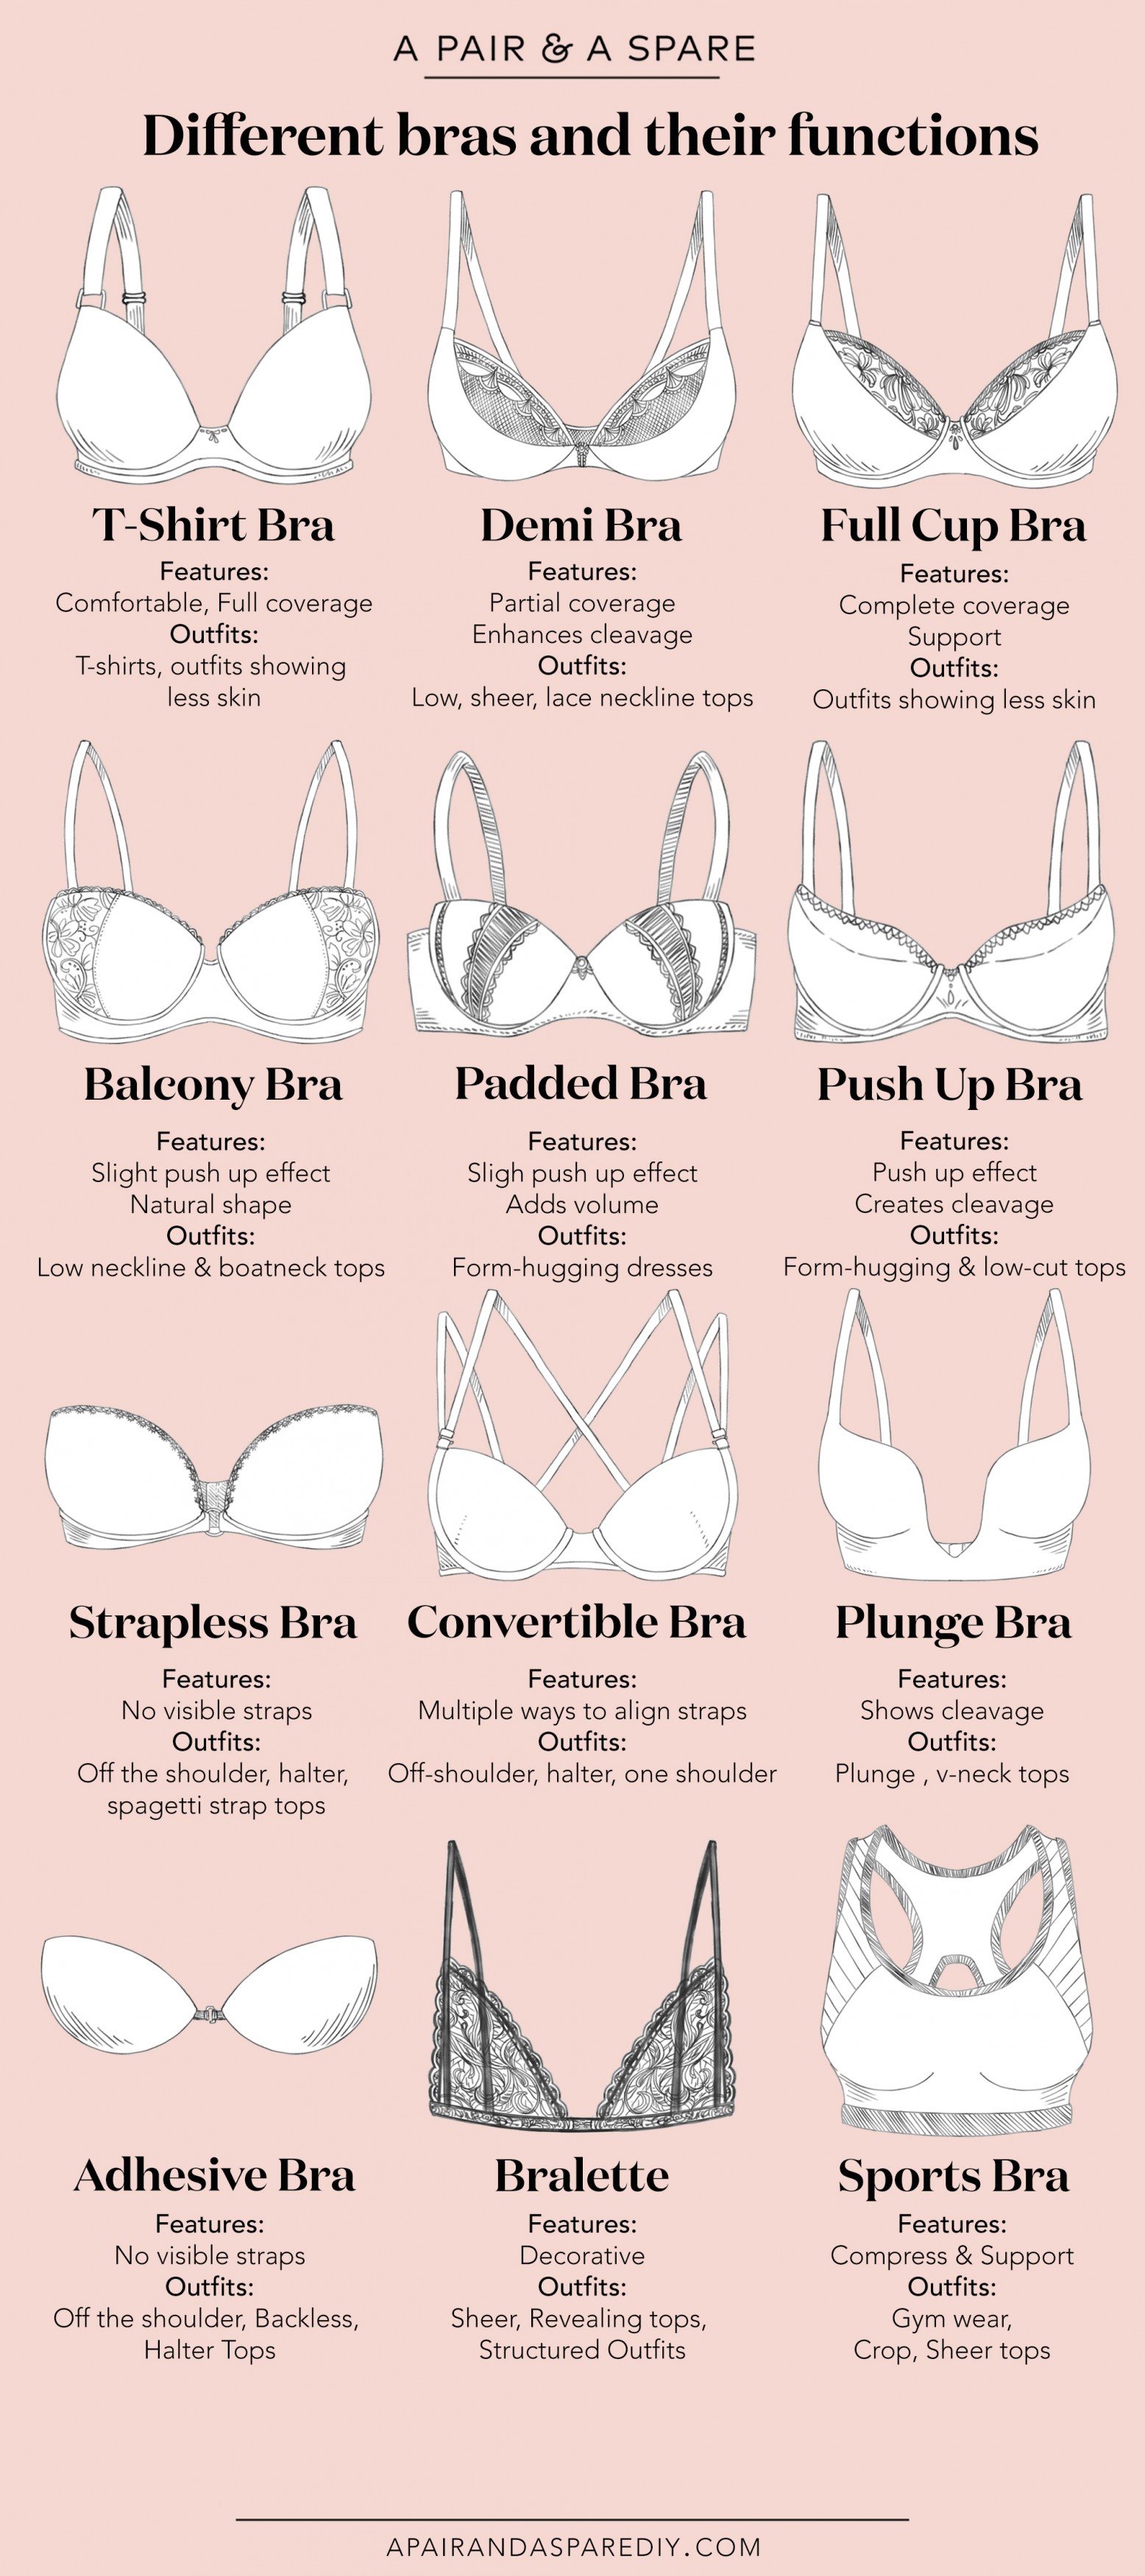 Ask Geneva: What Bra Should I Wear With This Outfit?